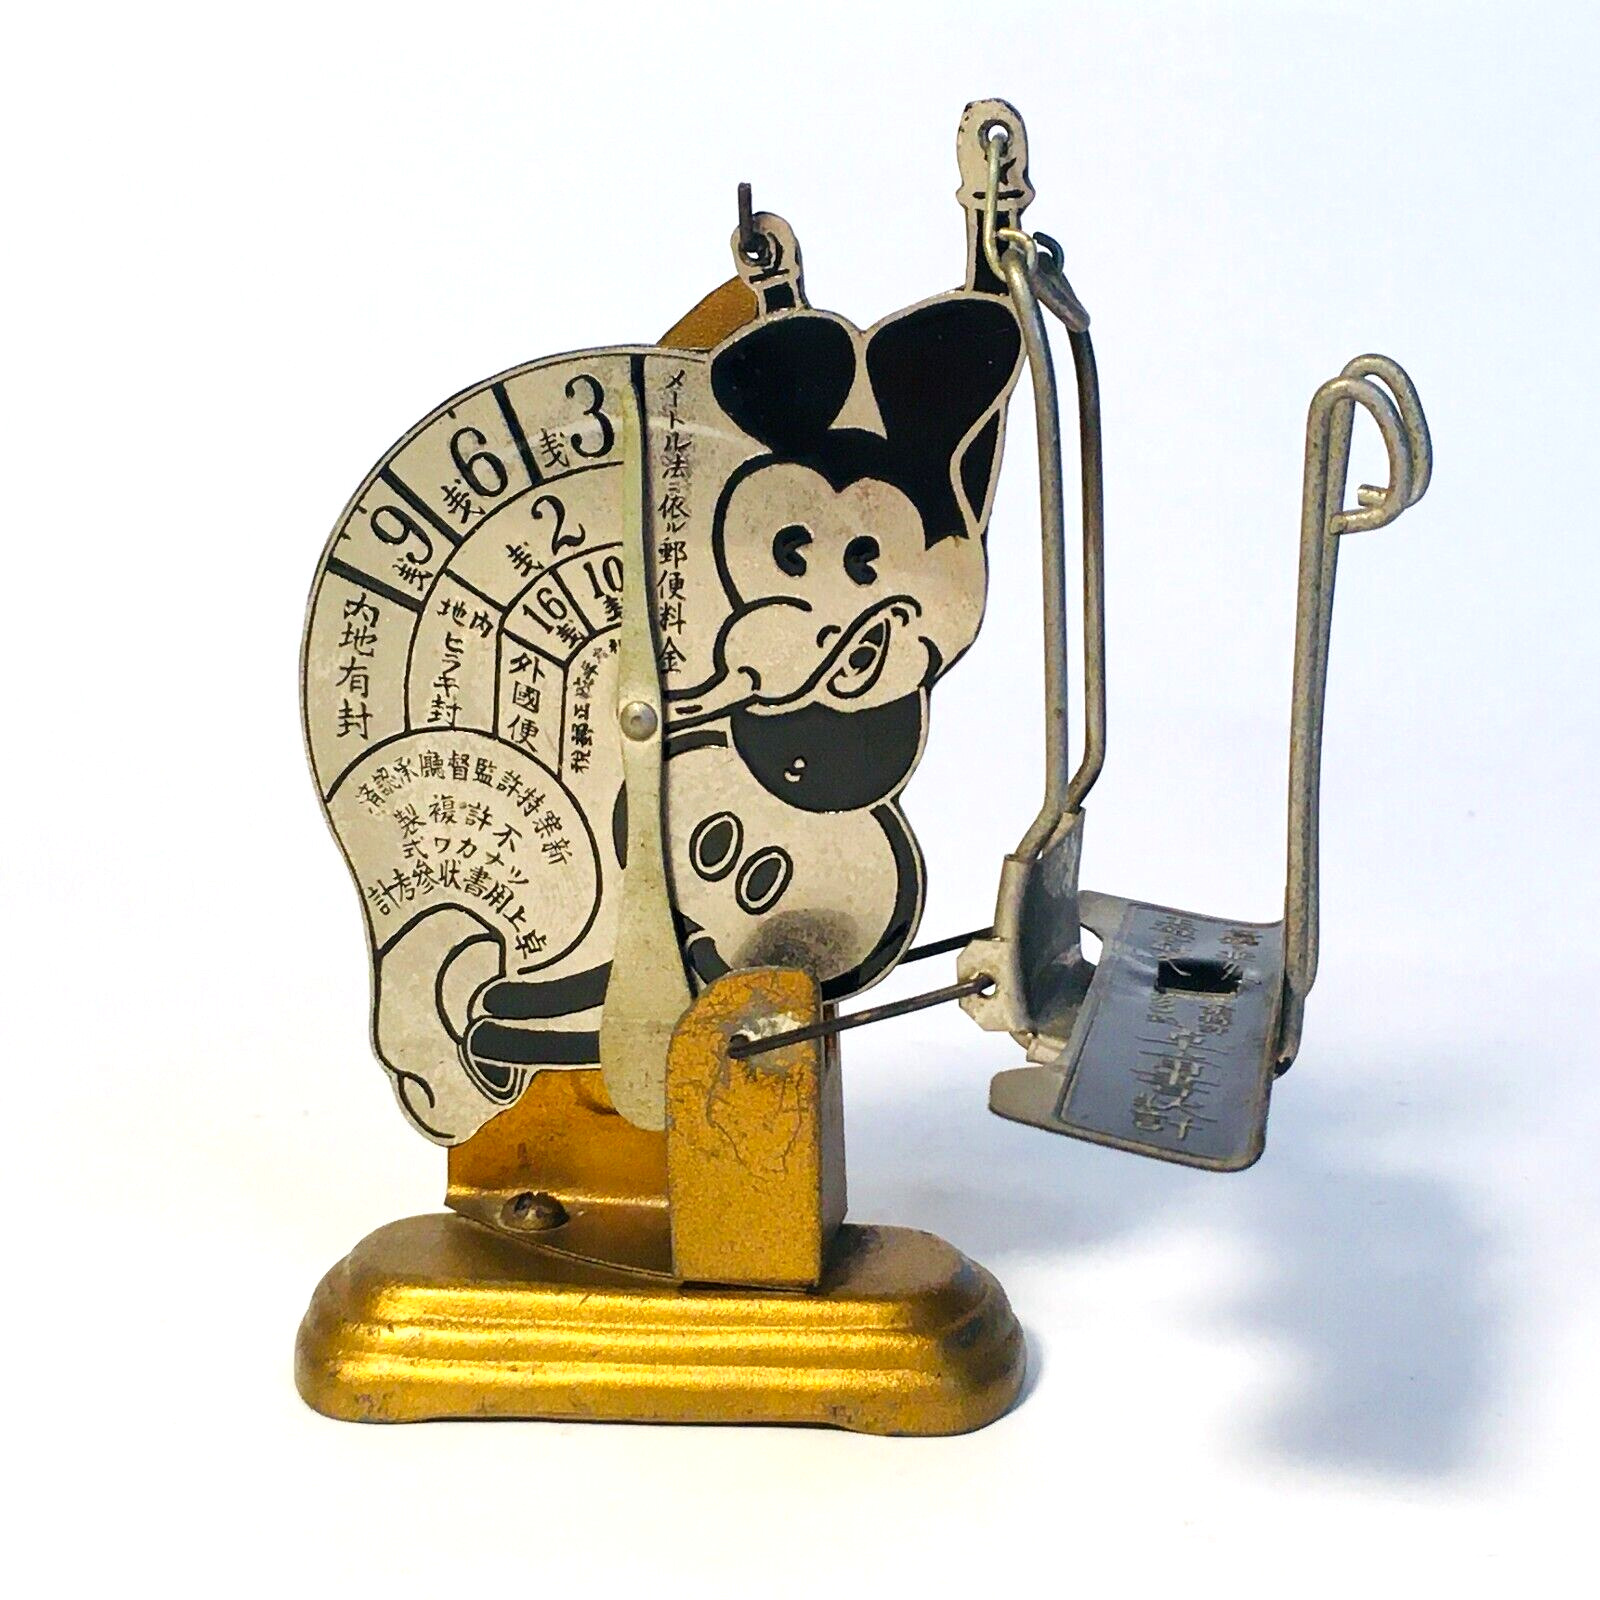 1935 Vintage Disney Mickey Mouse Postal scale Postage scale made in japan rare